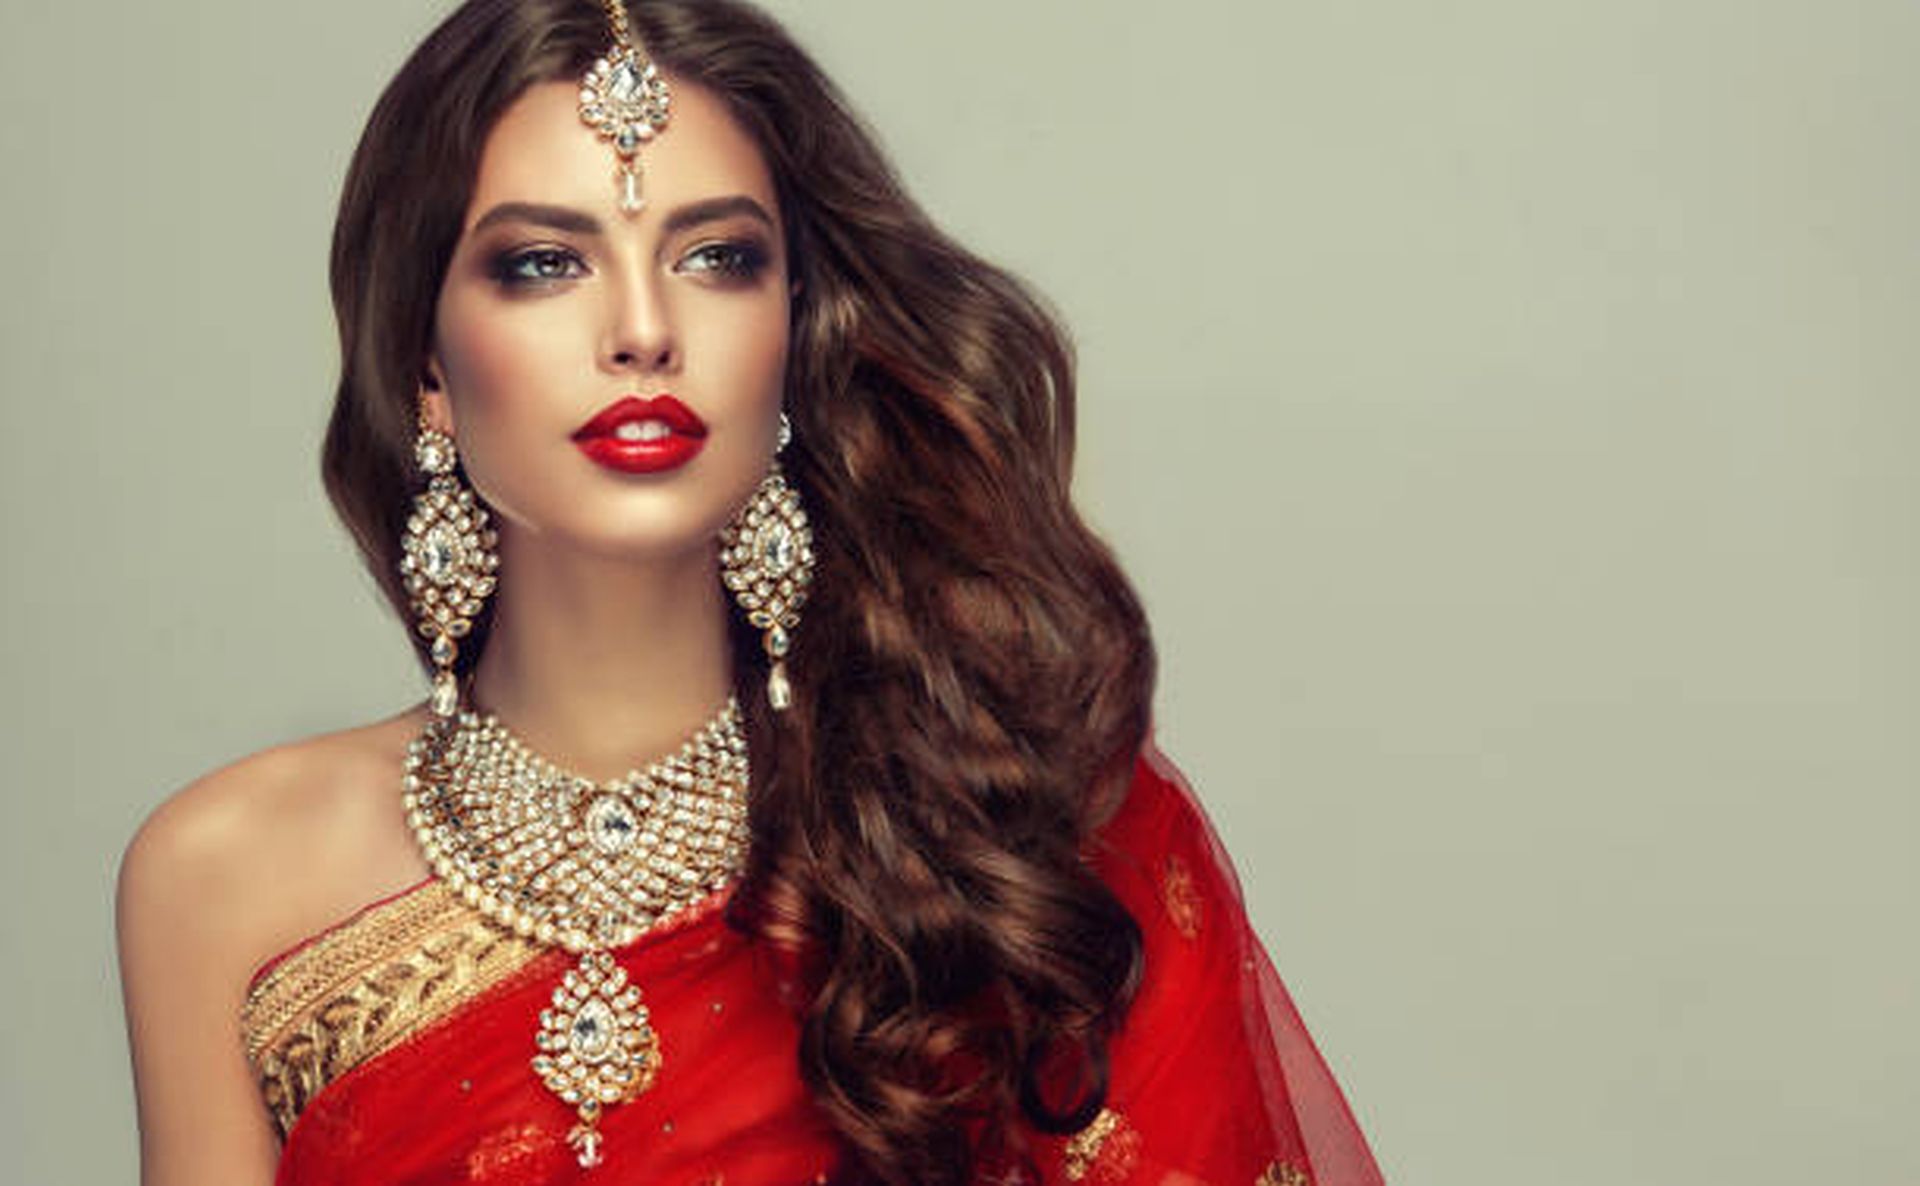 What Is The Best Hairstyle For An Indian Wedding?